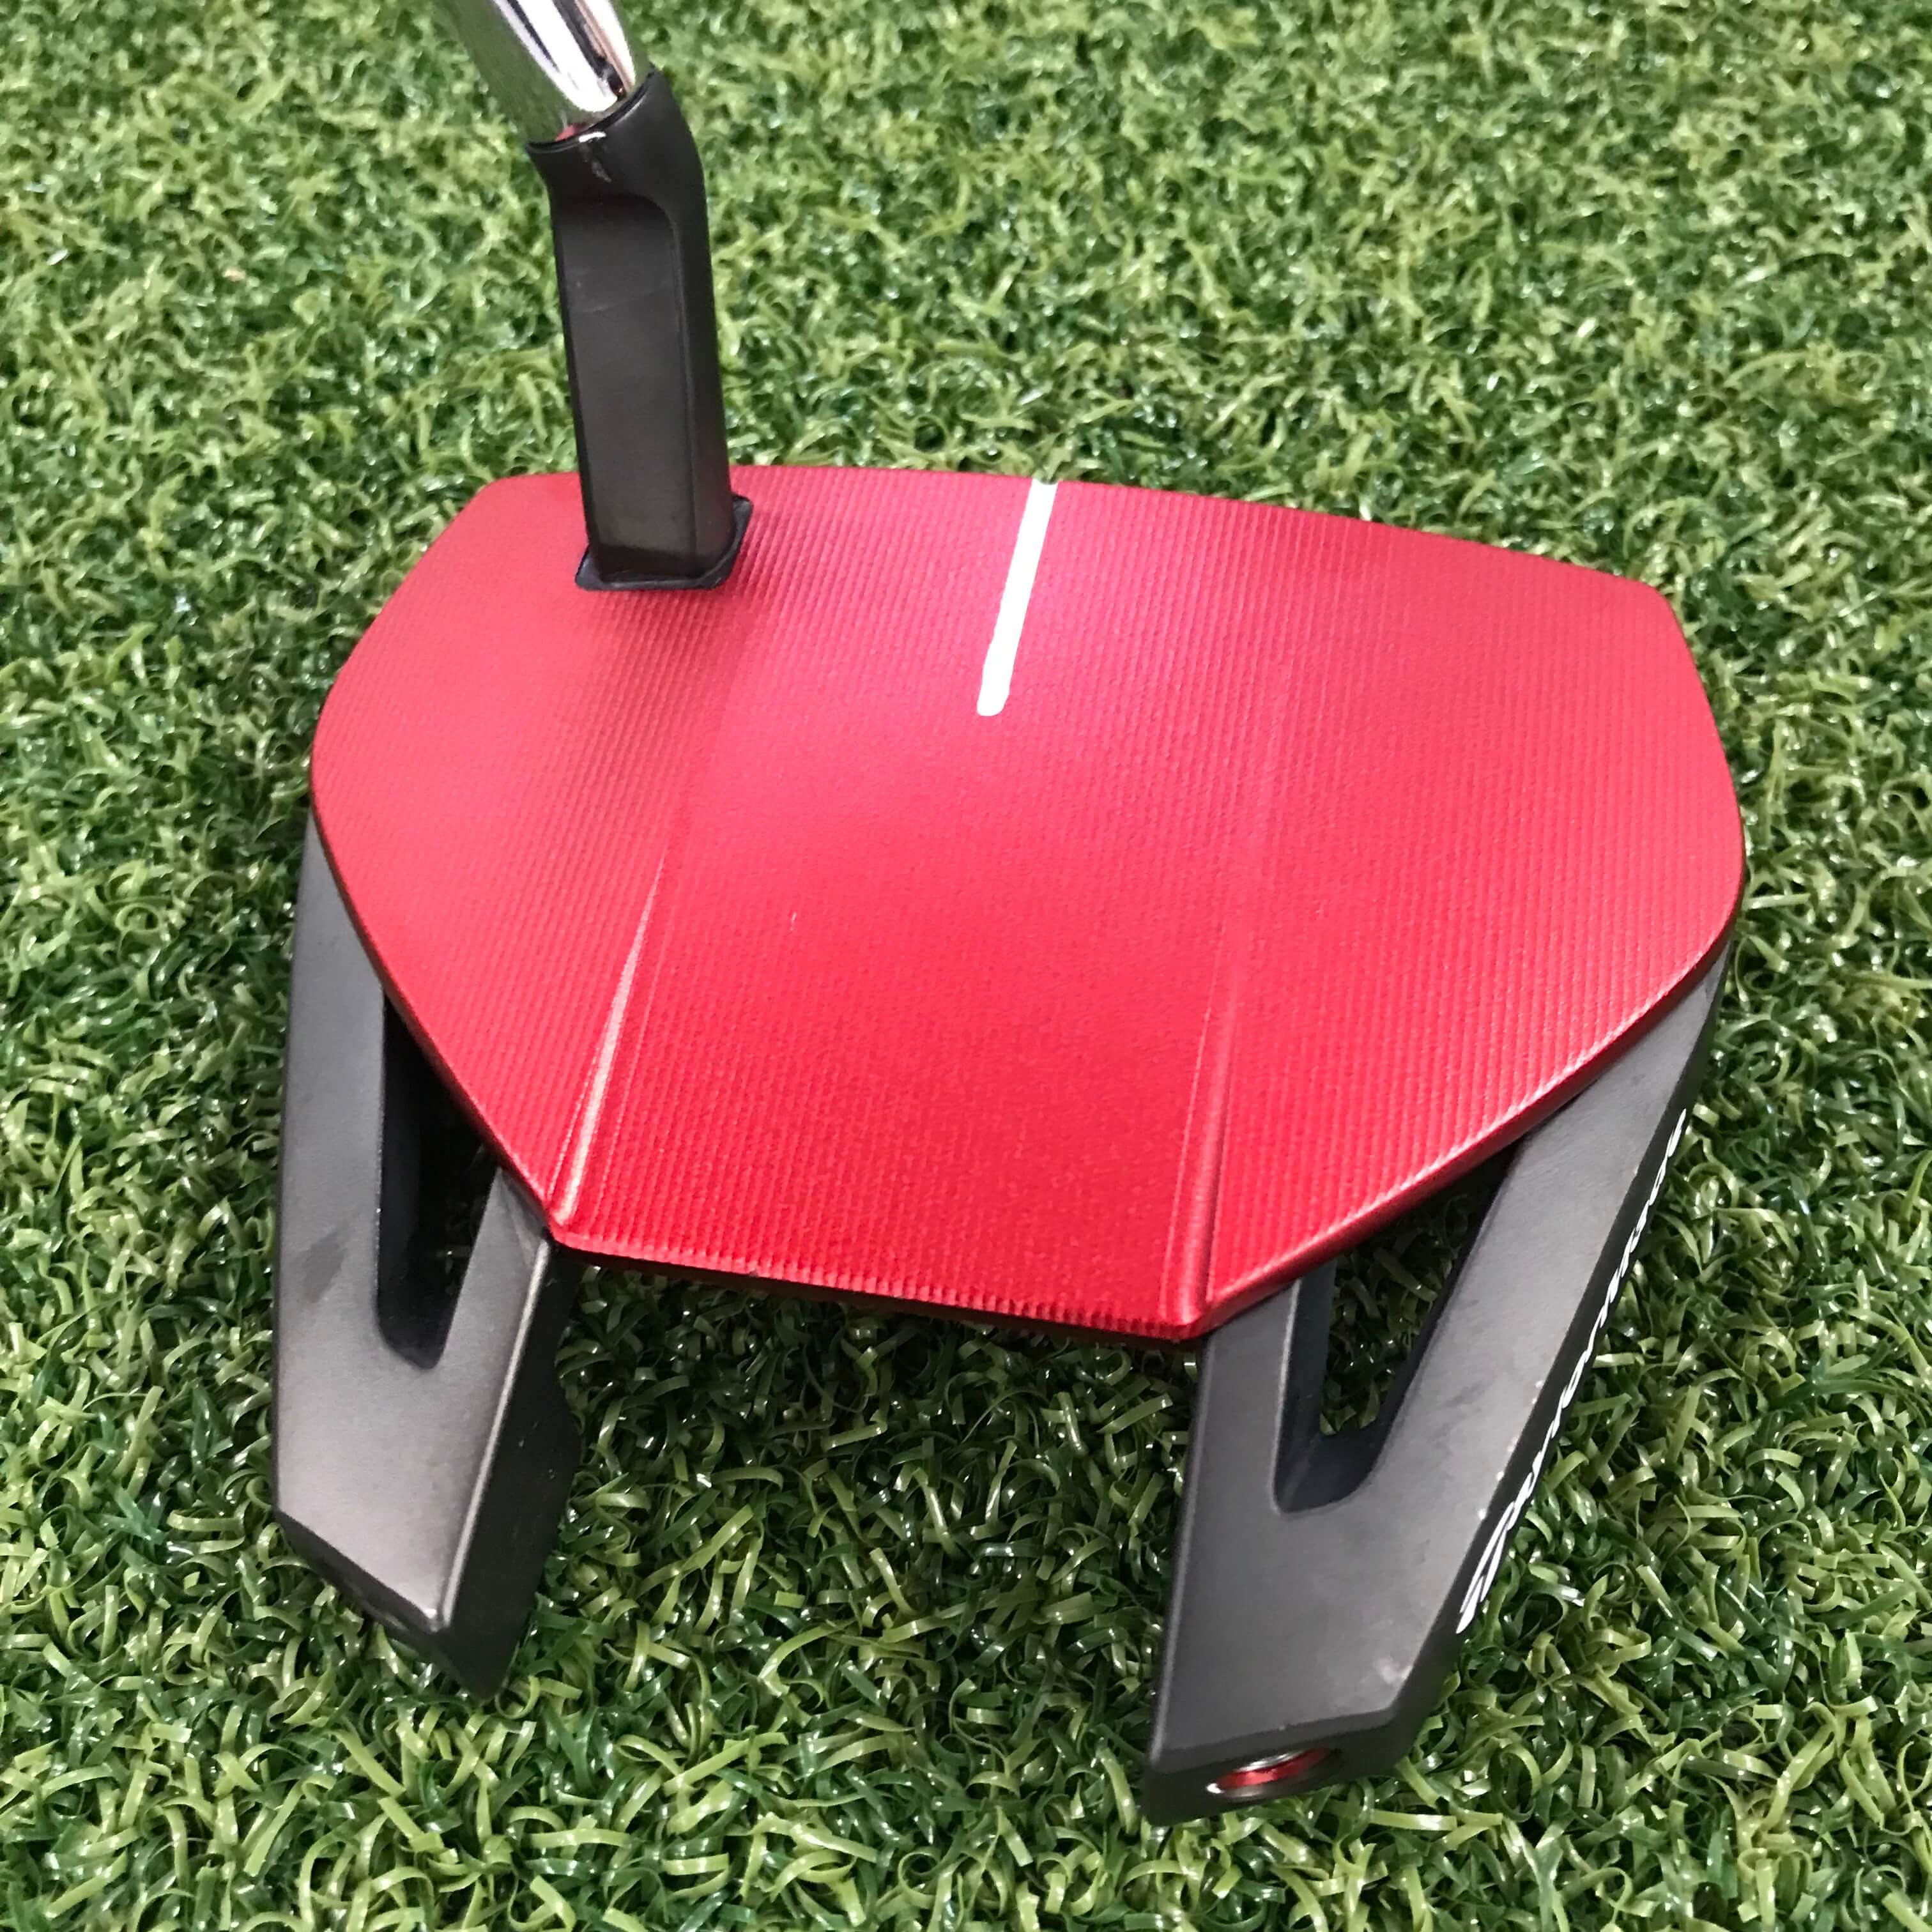 TaylorMade Spider GT Small Slant Golf Putter Red - Used